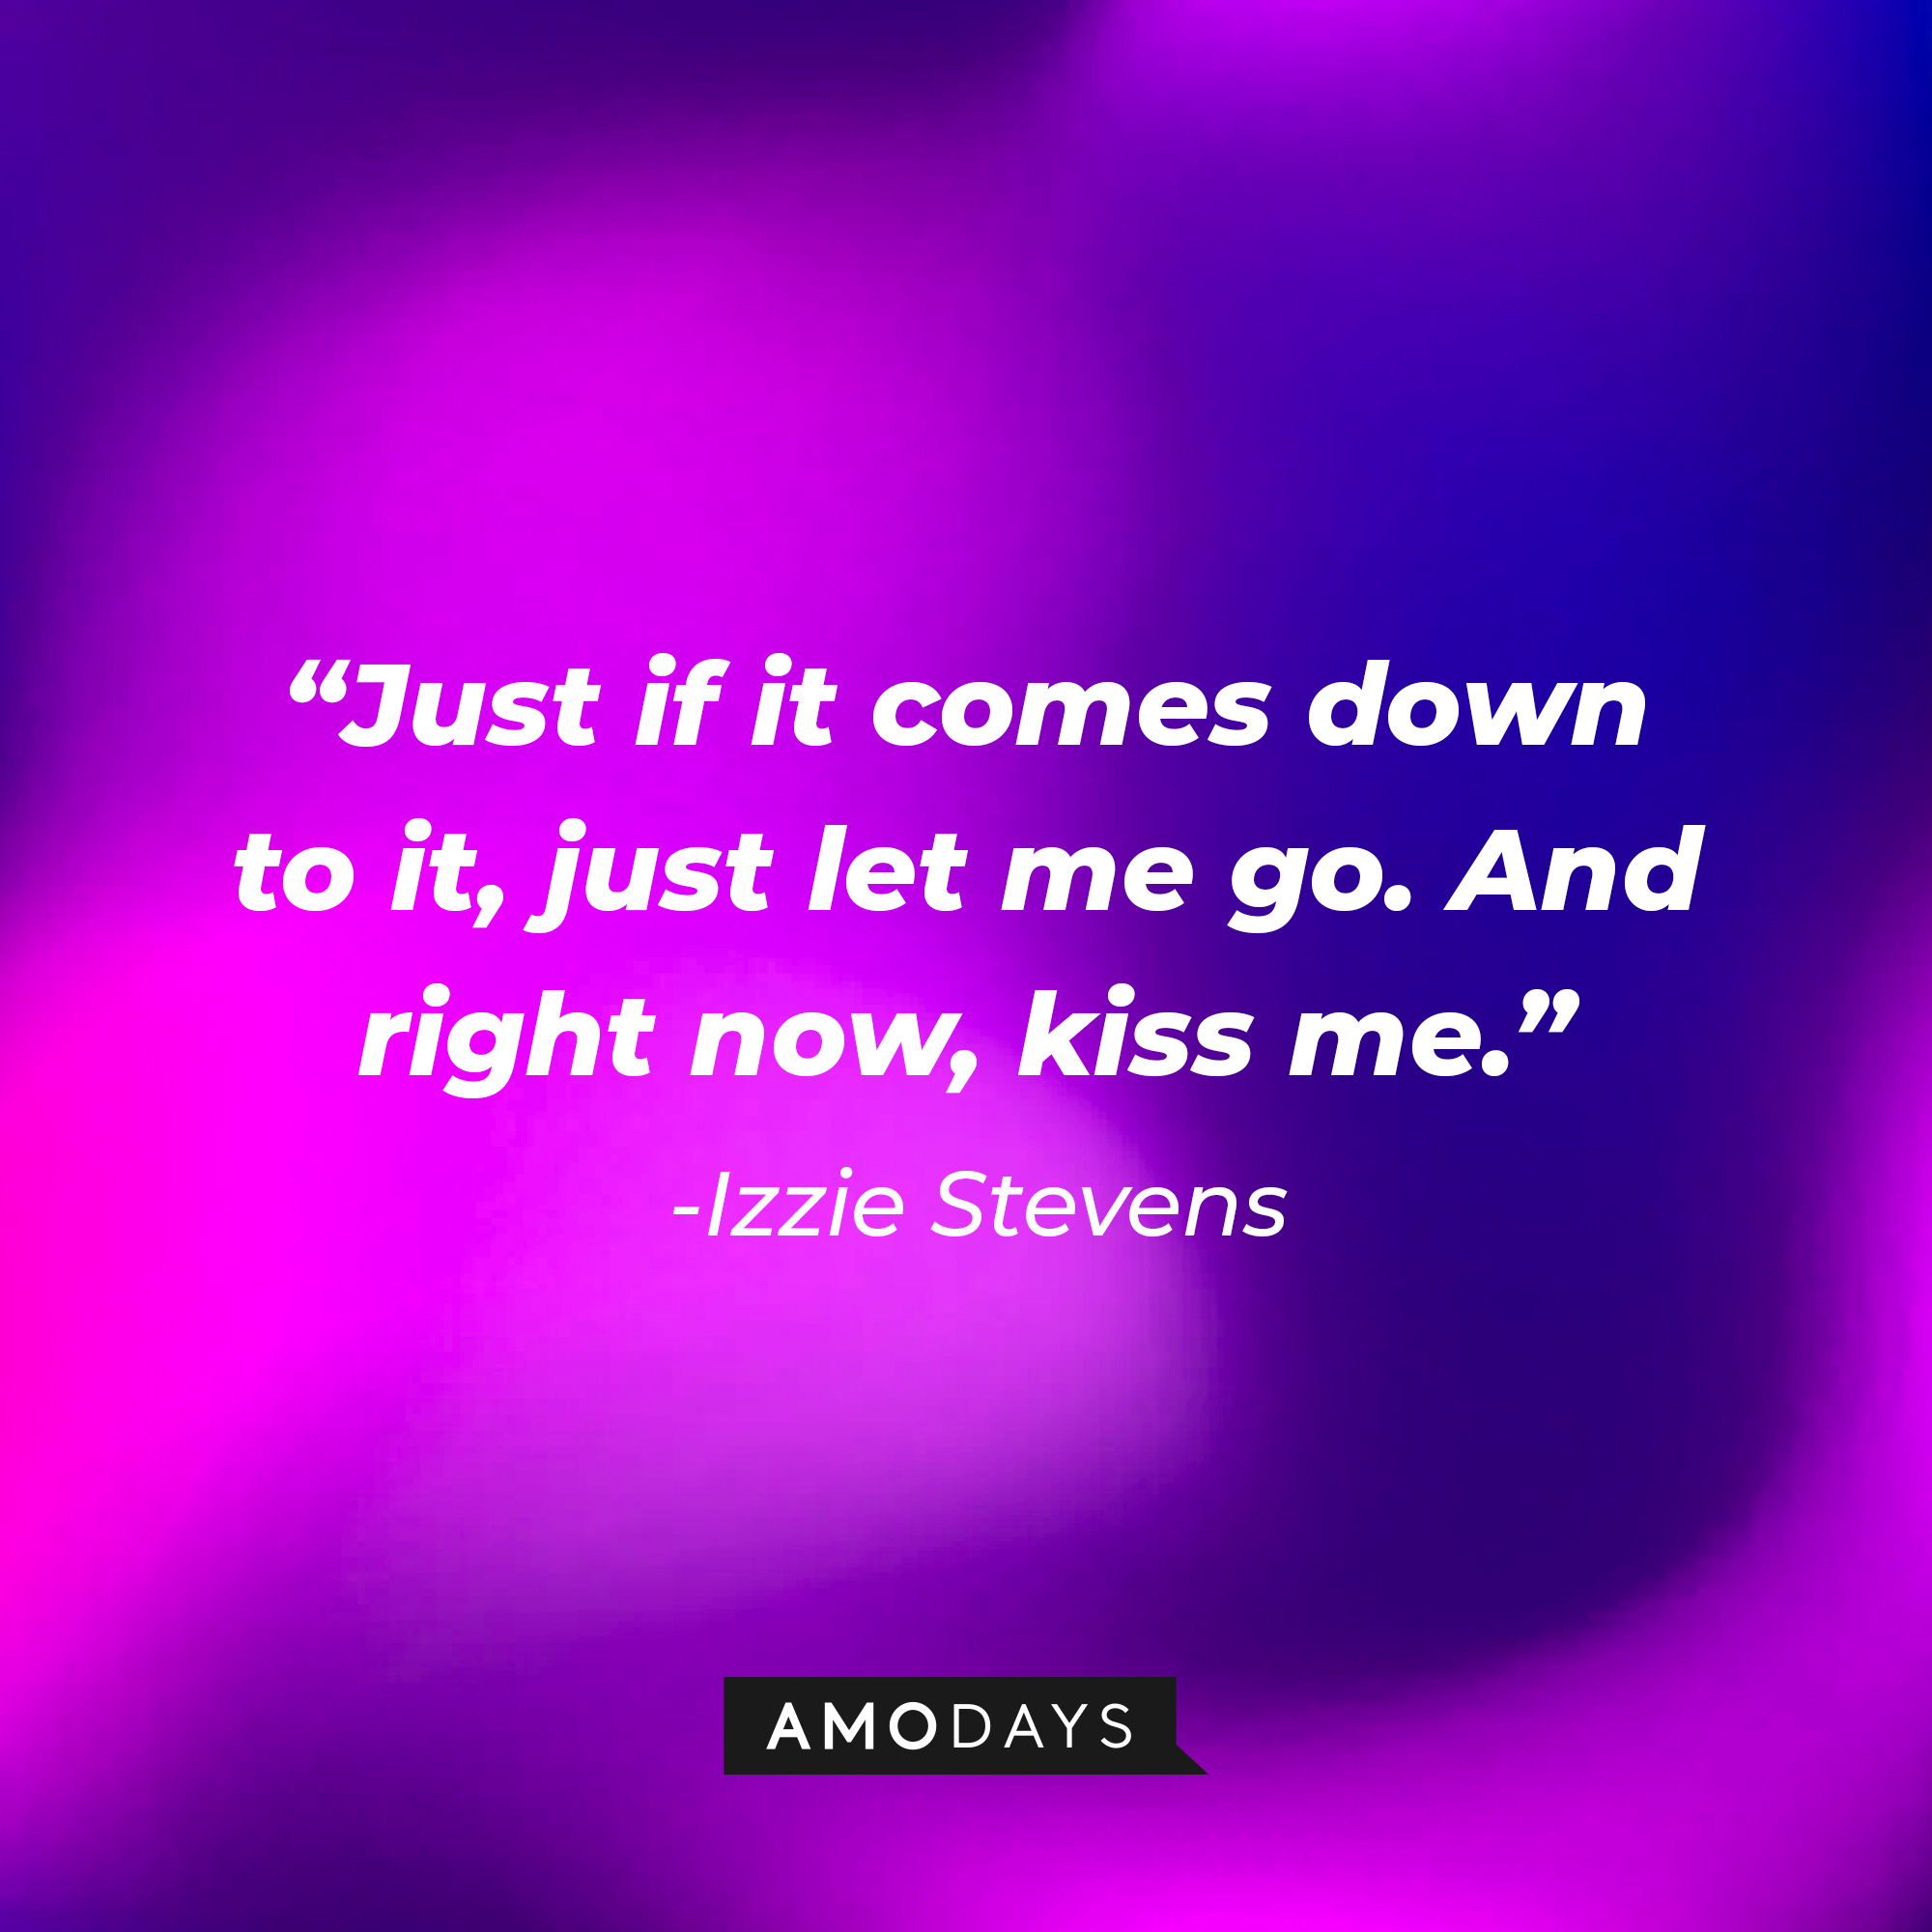 Izzie Stevens' quote: “Just if it comes down to it, just let me go. And right now, kiss me.” | Image: Amodays